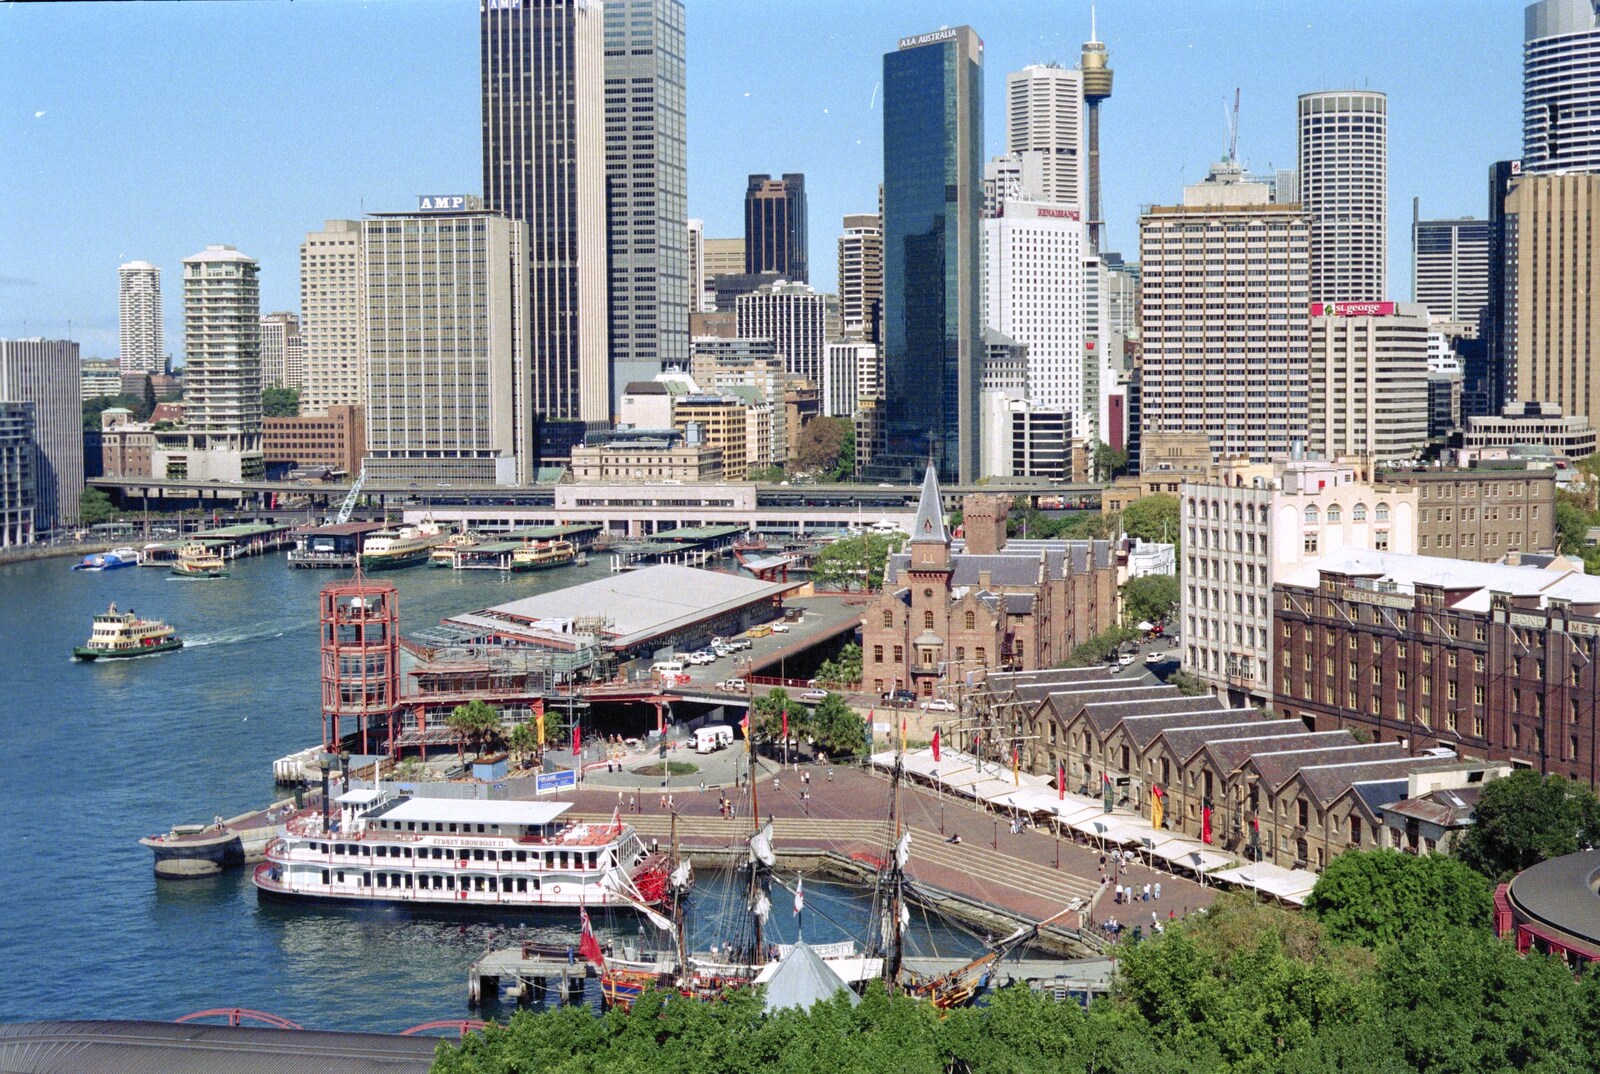 A clear view of Circular Quay and Sydney from A Trip to the Zoo, Sydney, Australia - 7th April 2000